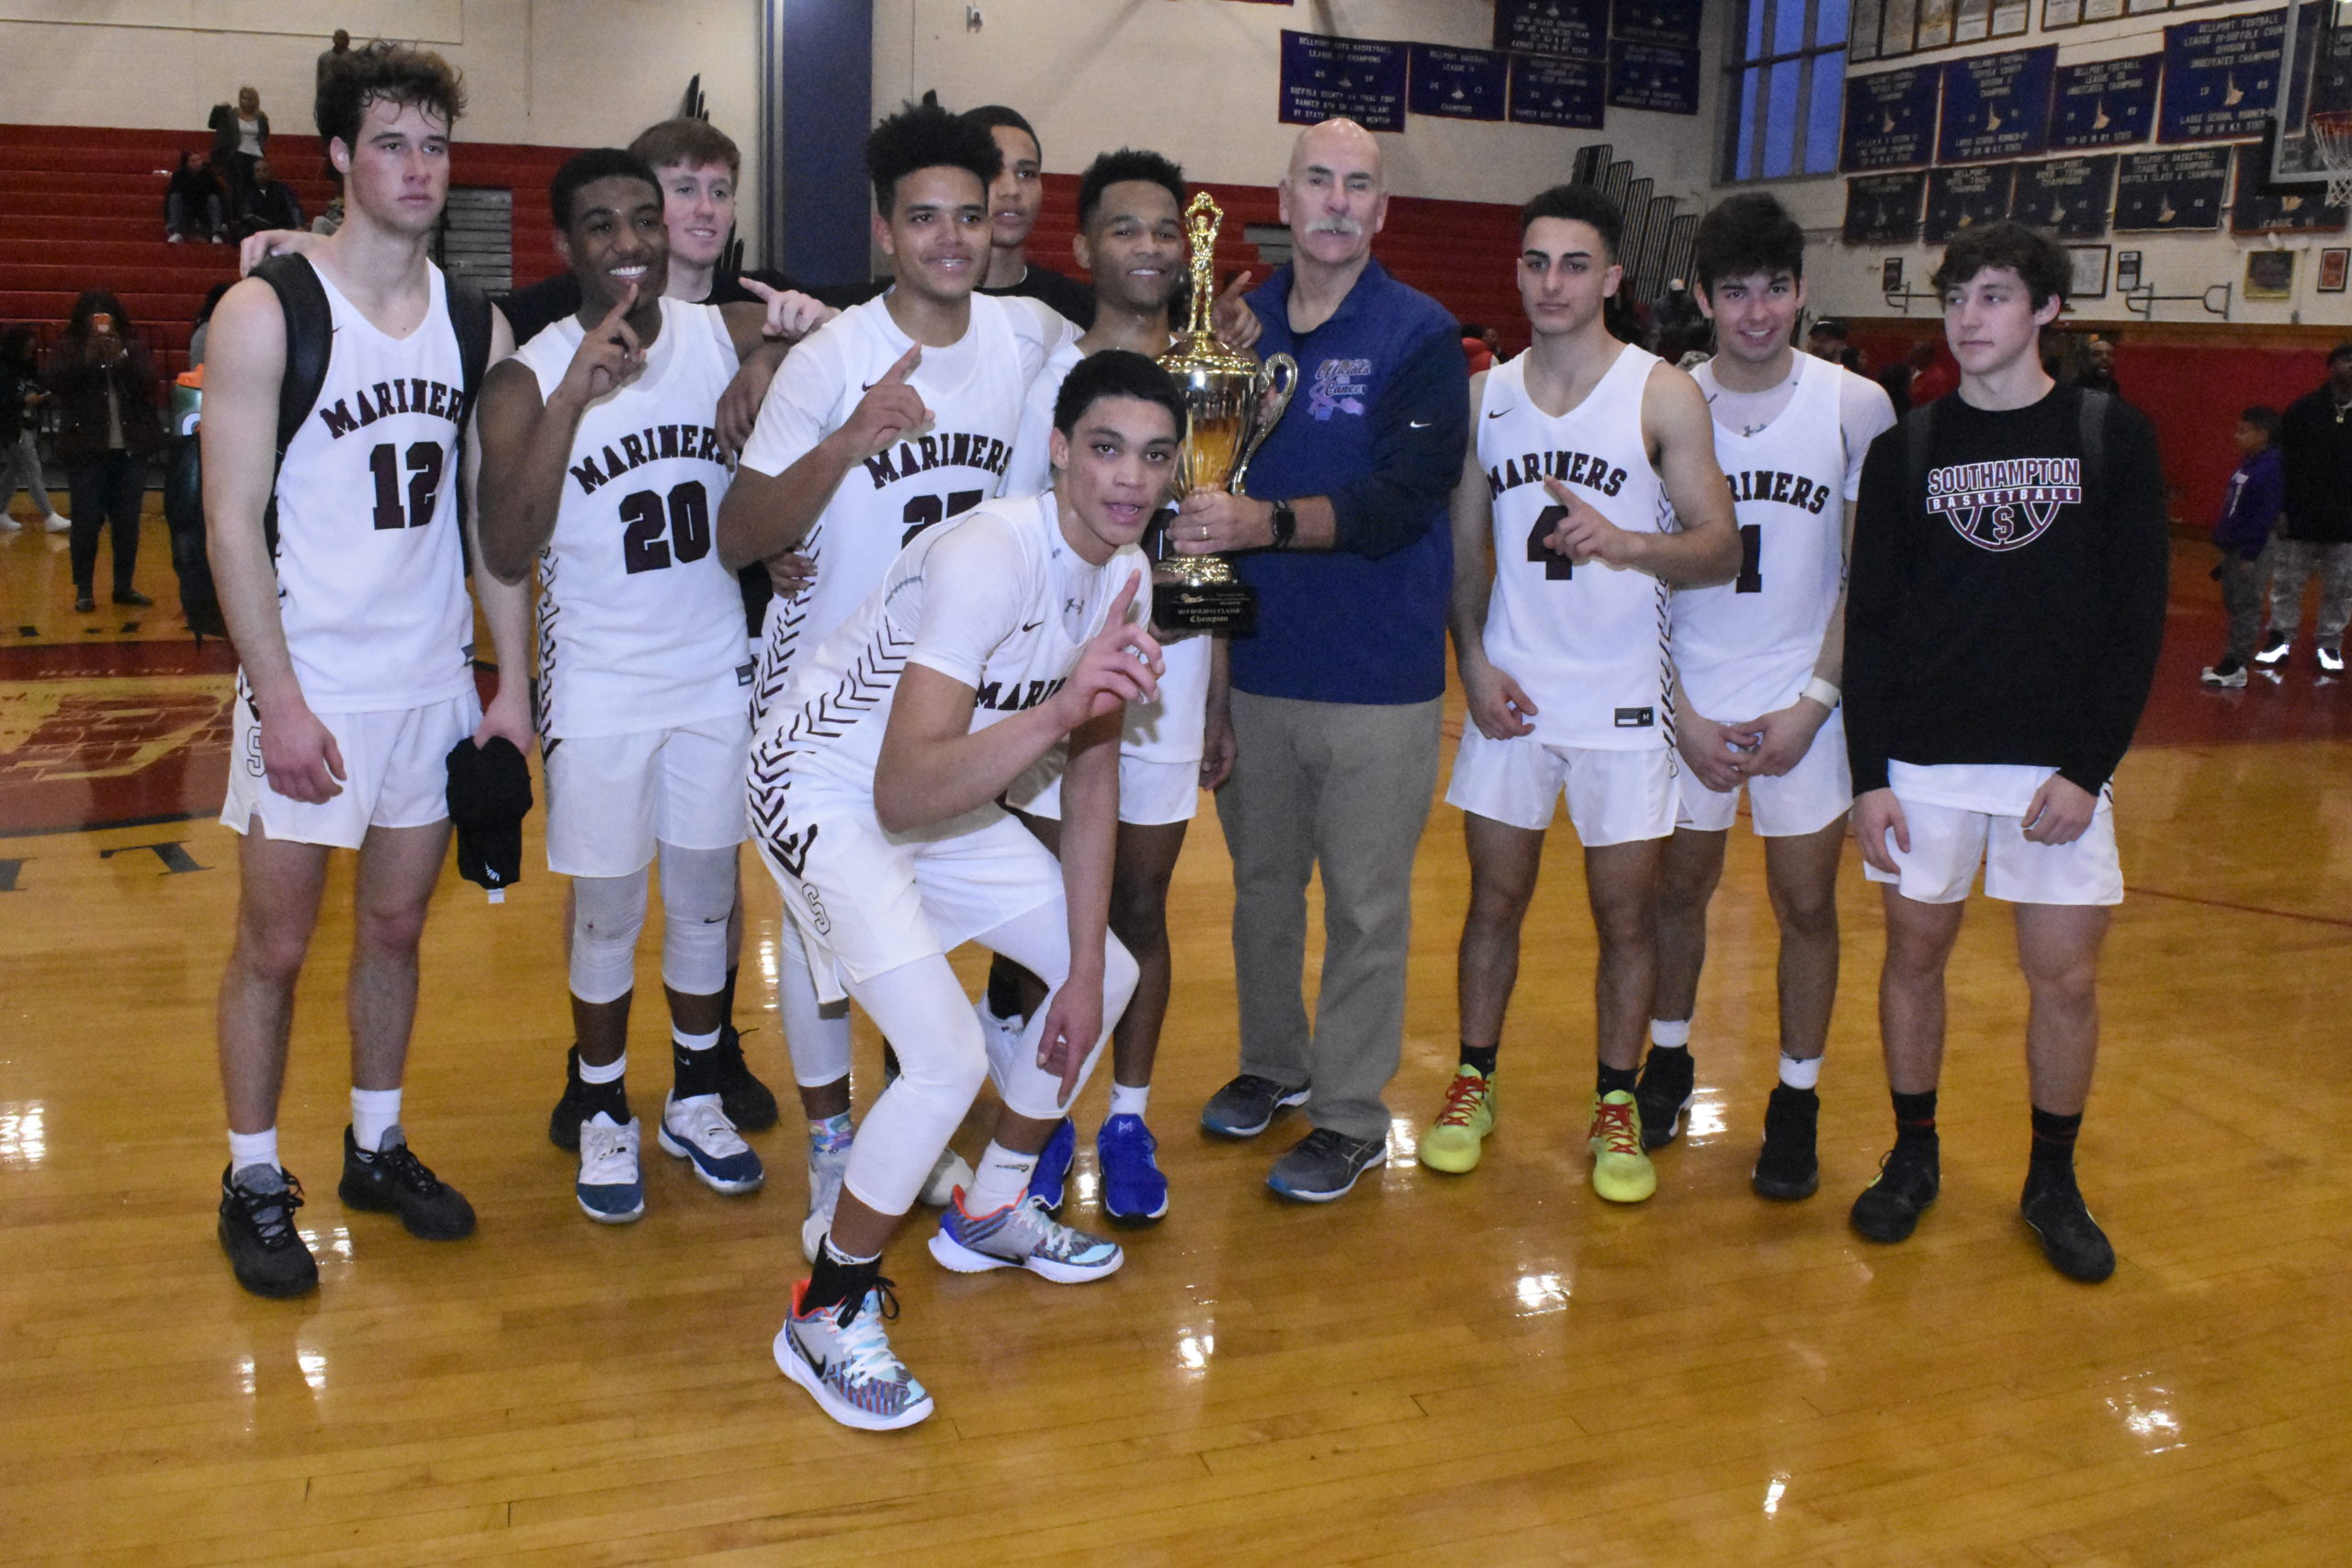 The Mariners defeated Riverhead, 62-58, on Sunday to win the Eastern Long Island Basketball Officials Holiday Classic.